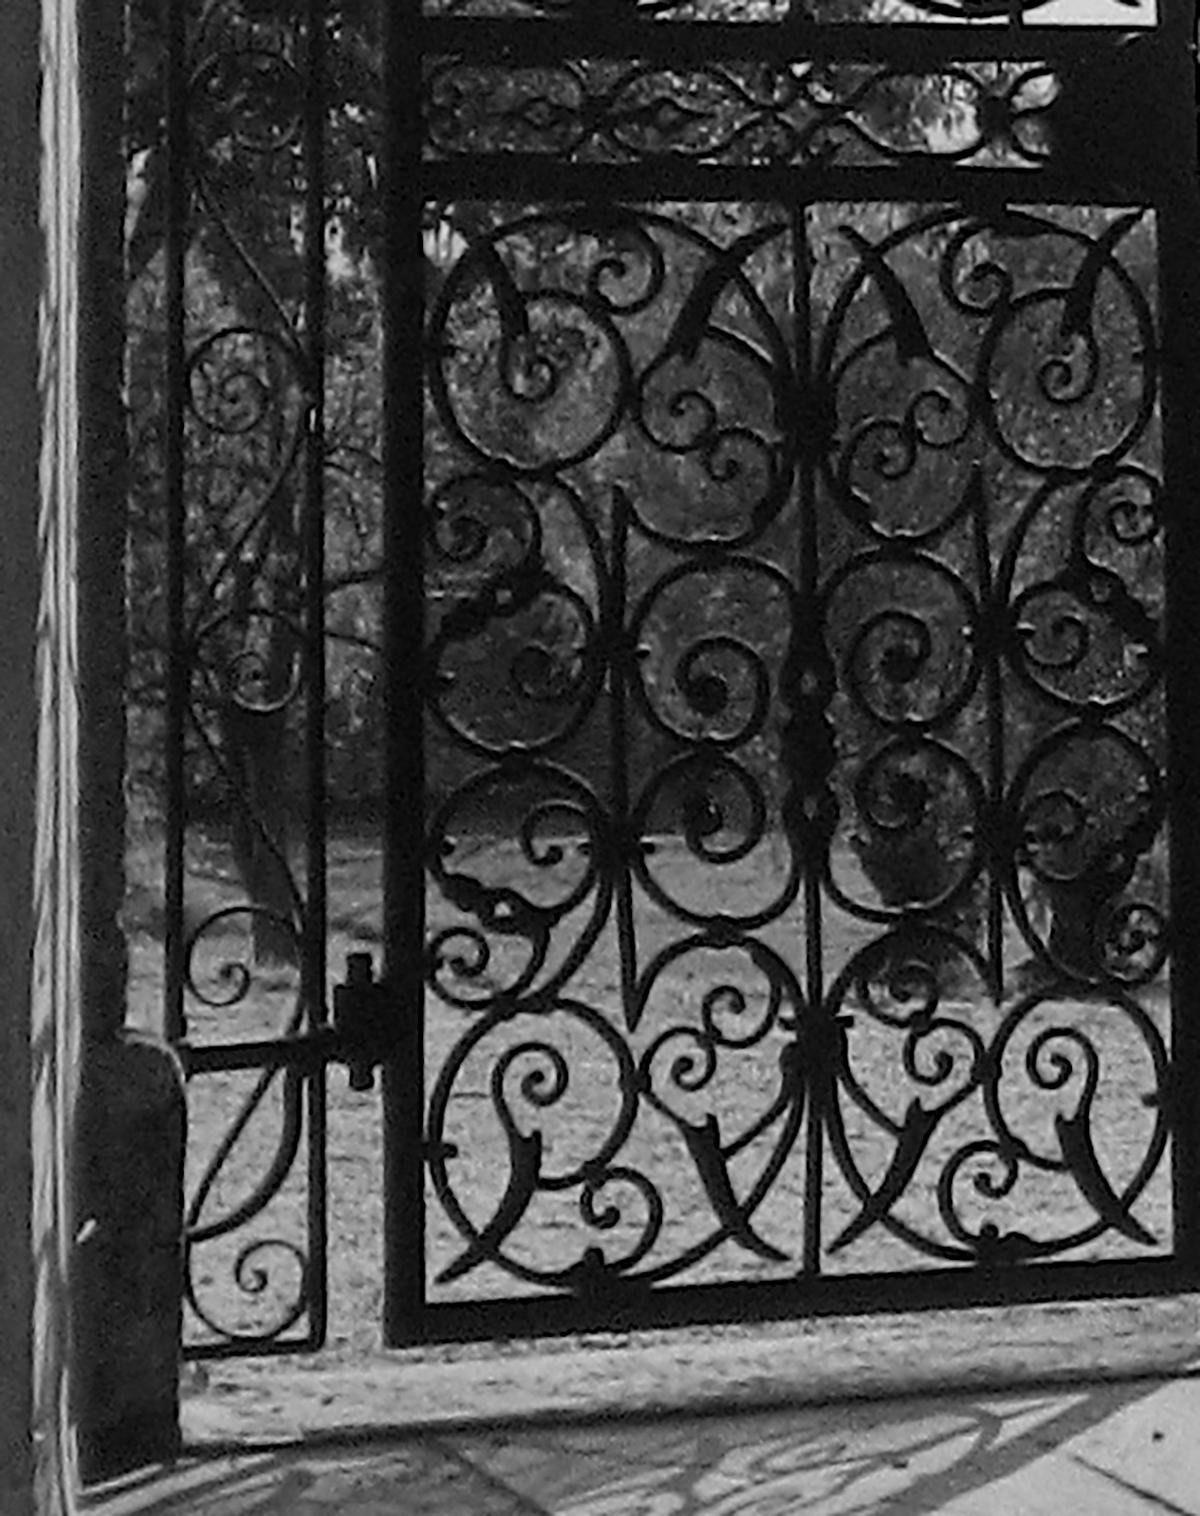 This 1960s romantic black and white silver gelatin print of a Roman gate and Italian grove with a chateau is by New York/San Francisco photographer Roz Joseph (1926-2019). Joseph traveled extensively in the 1960s shooting in black and white and